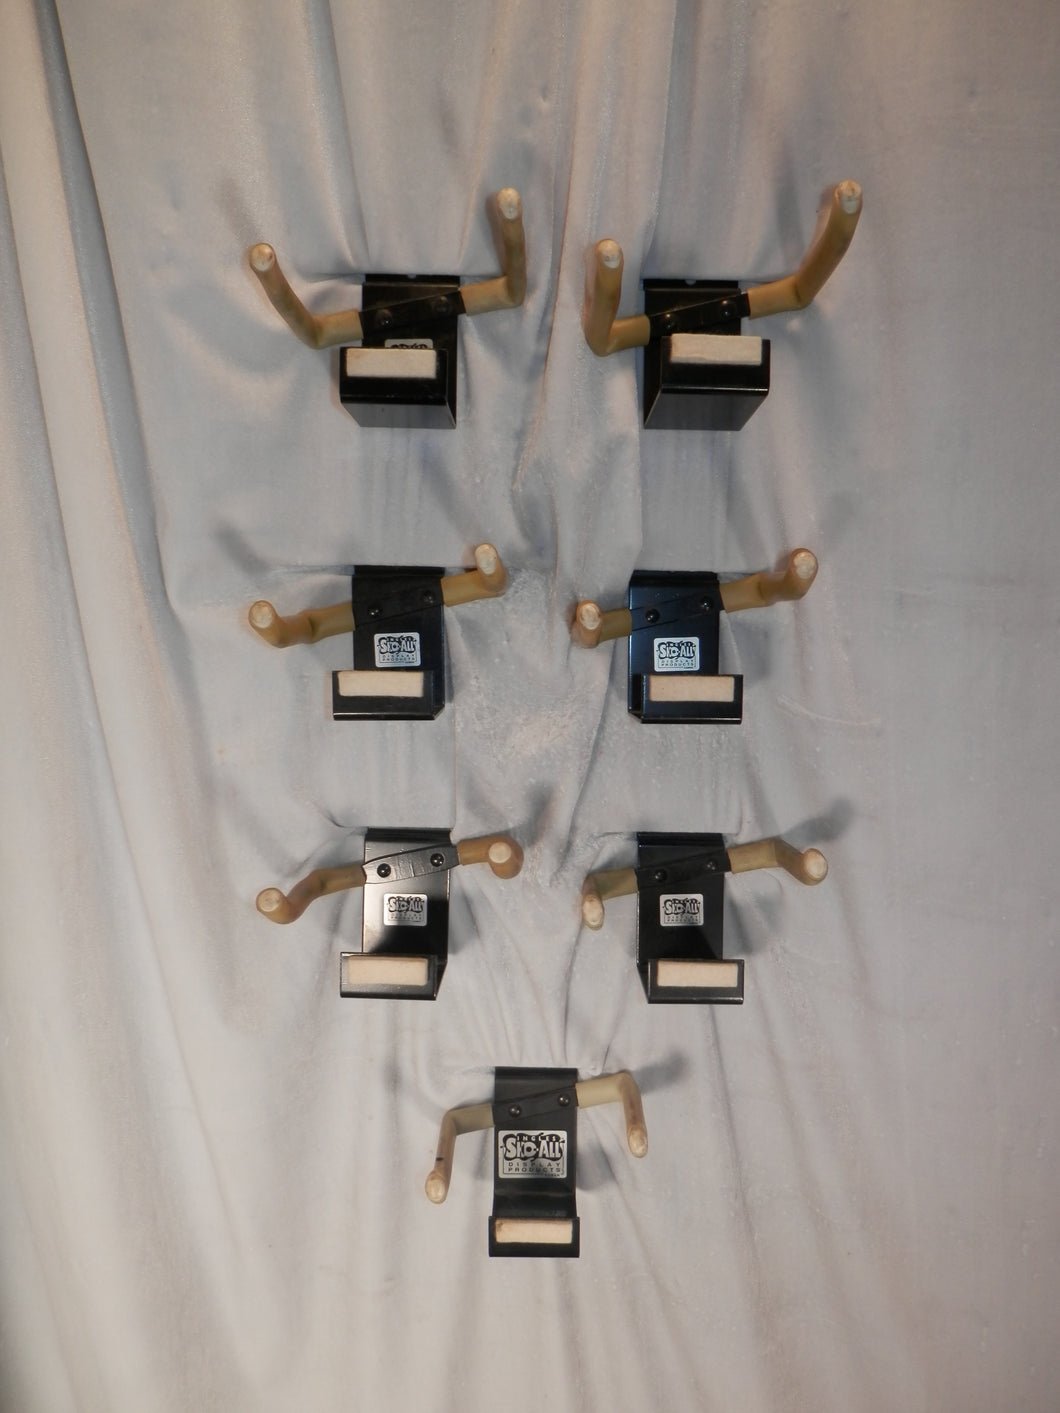 Sho-All Trumpet Holders for Slatboard Display Lot of 7 used